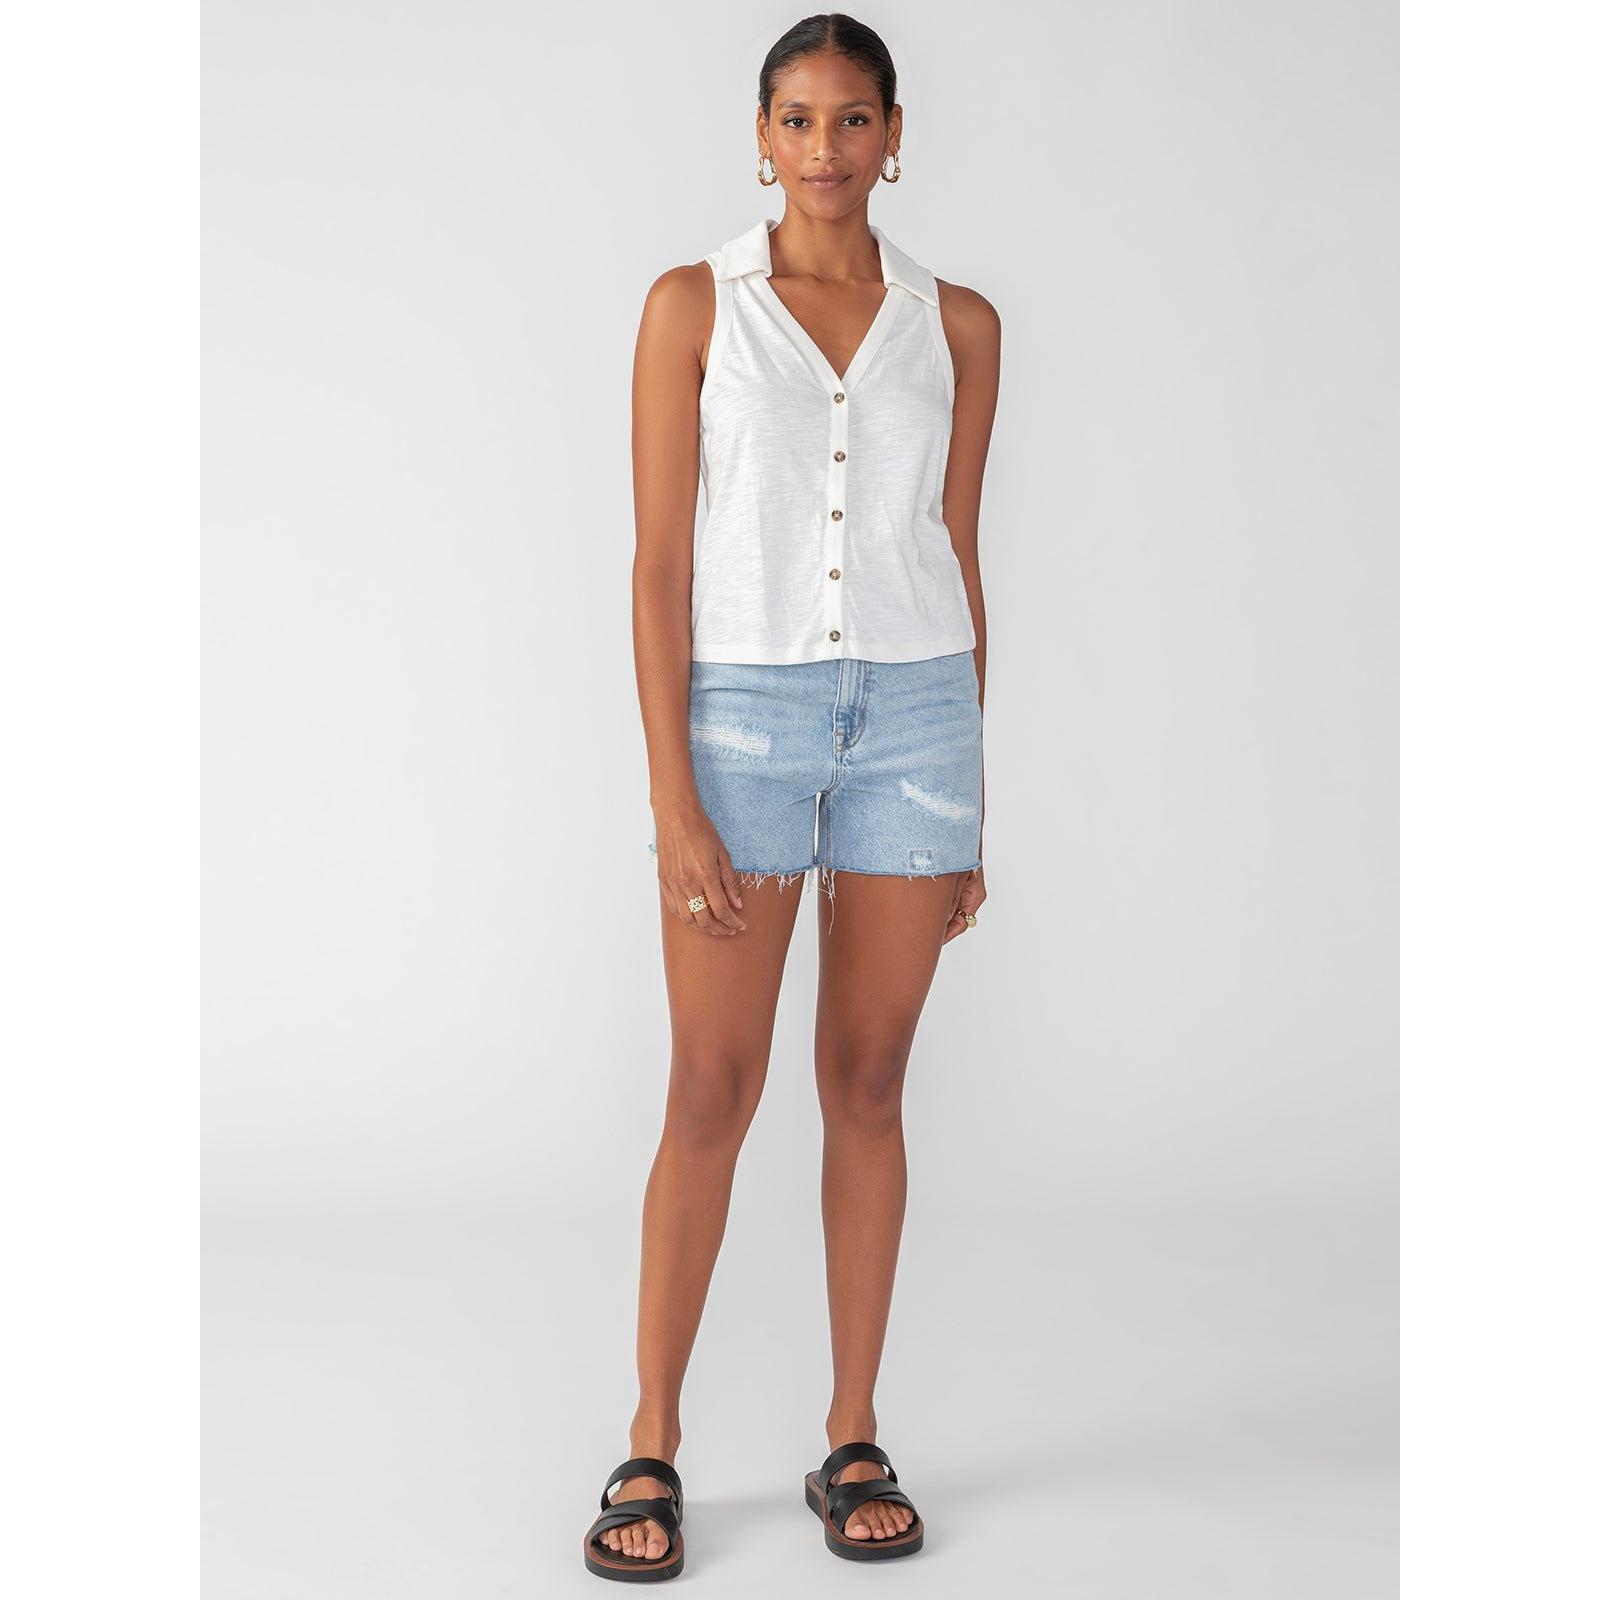 Sanctuary - Master Plan Button Up Tank in White-SQ9528352